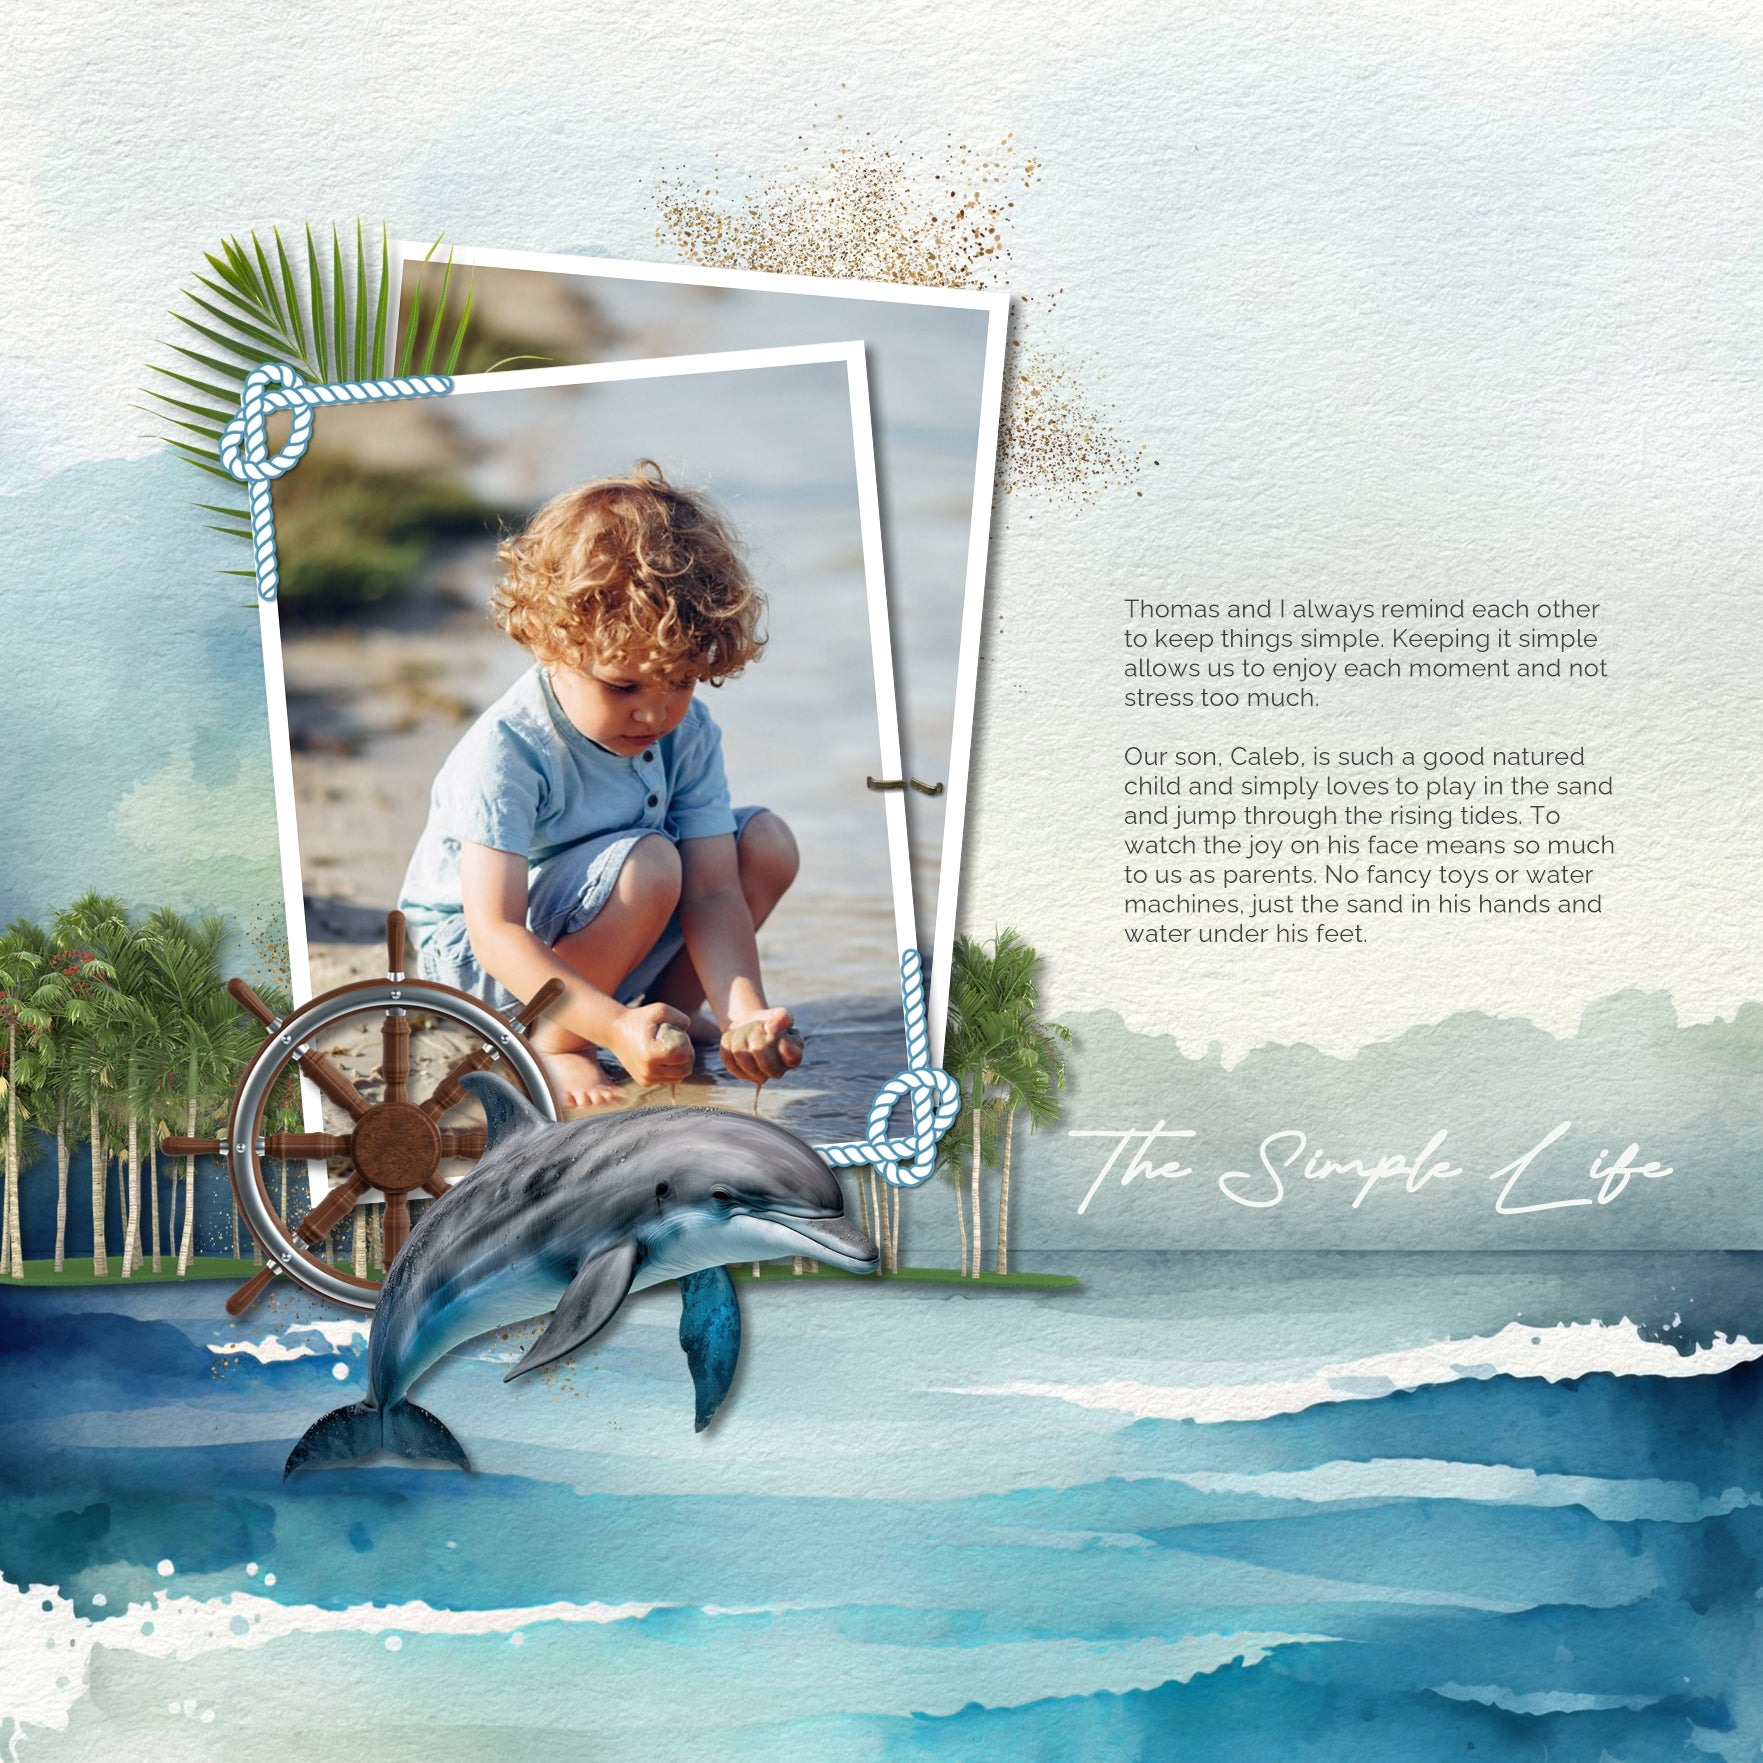 Highlight your tropical vacation and cruise ship excursion memories with these beautiful realistic digital embellishments and watercolor papers by Lucky Girl Creative. Great for holidays to Hawaii, the Caribbean, Florida, California, cruise ship adventures, and beach vacations.